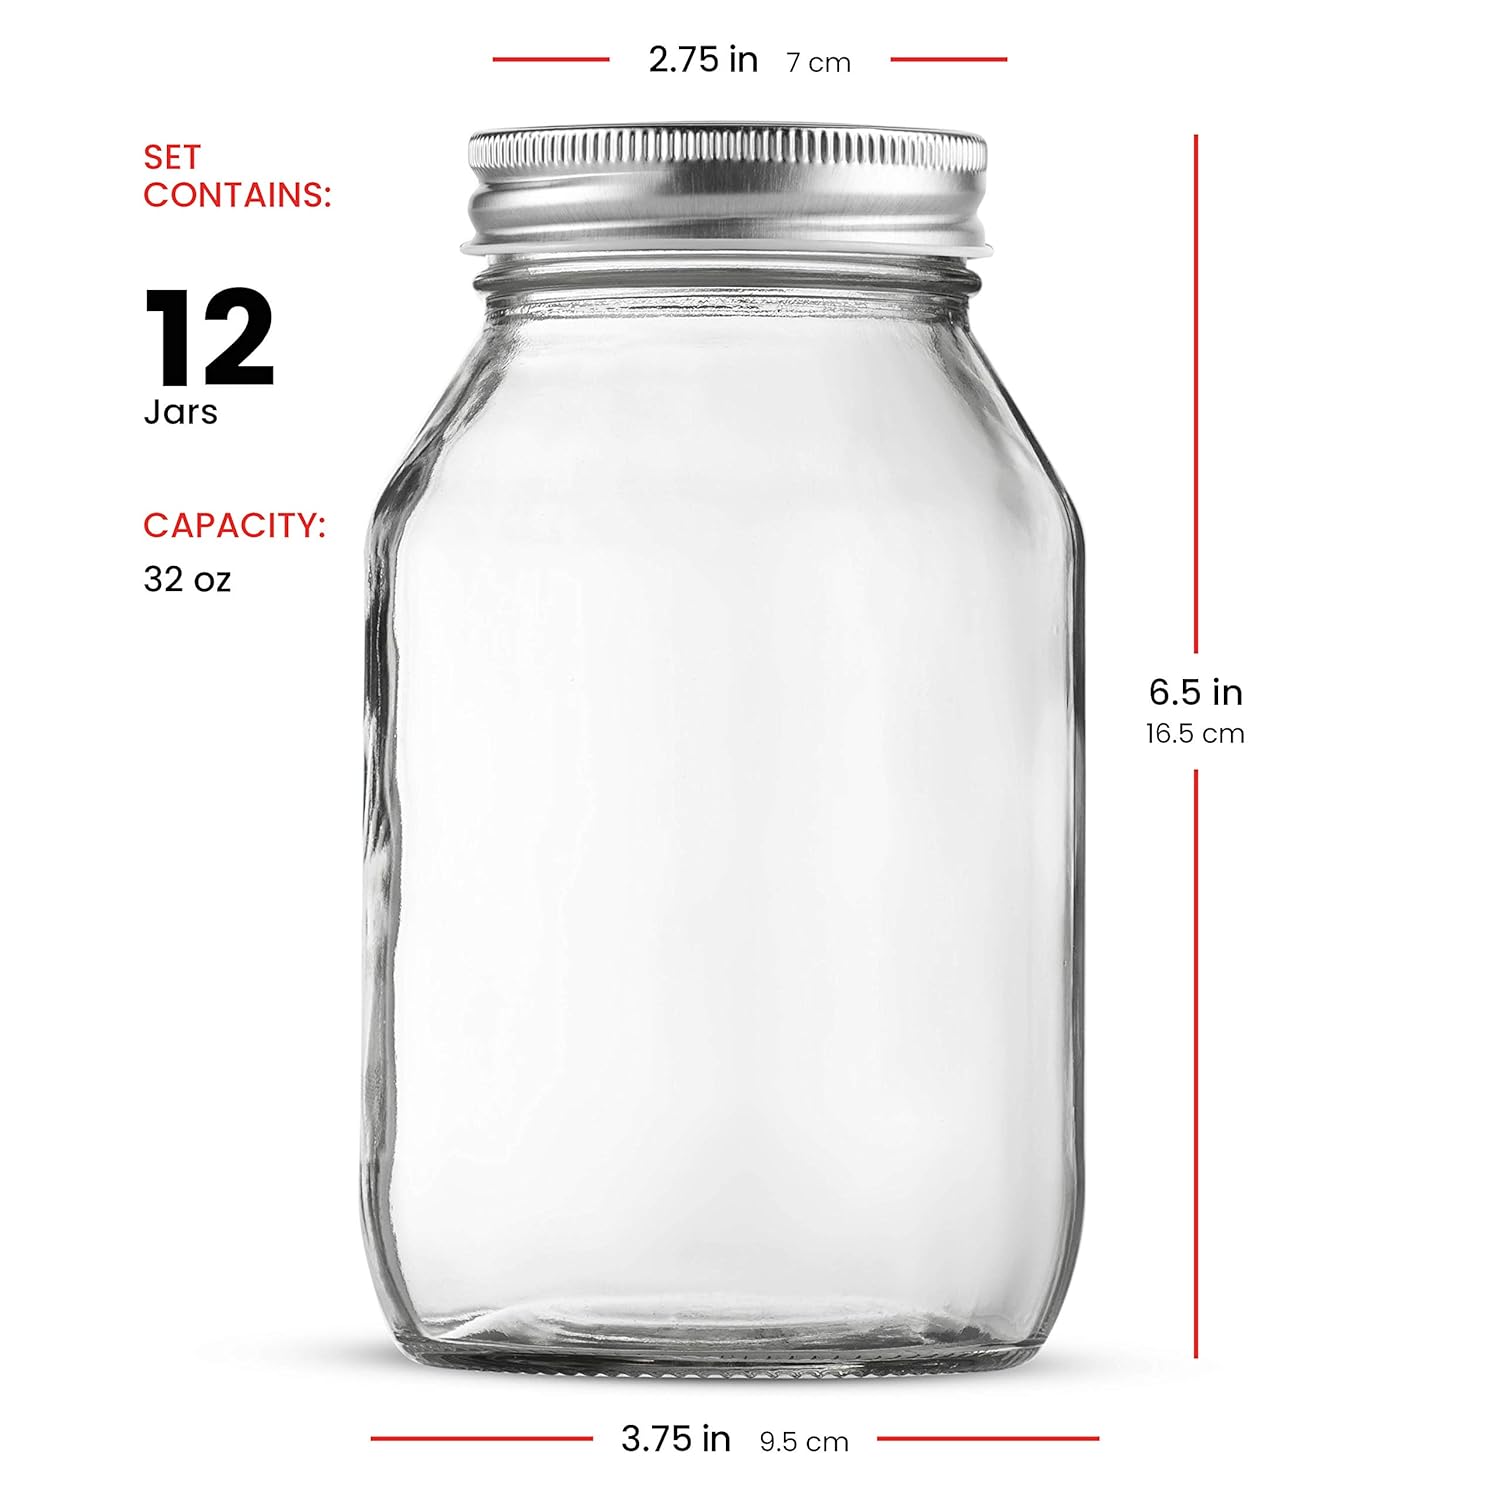 Glass Regular Mouth Mason Jars, 32 Ounce (12 Pack) Glass Jars with Silver Metal Airtight Lids for Meal Prep, Food Storage, Canning, Drinking, Overnight Oats, Jelly, Dry Food, Spices, Sa